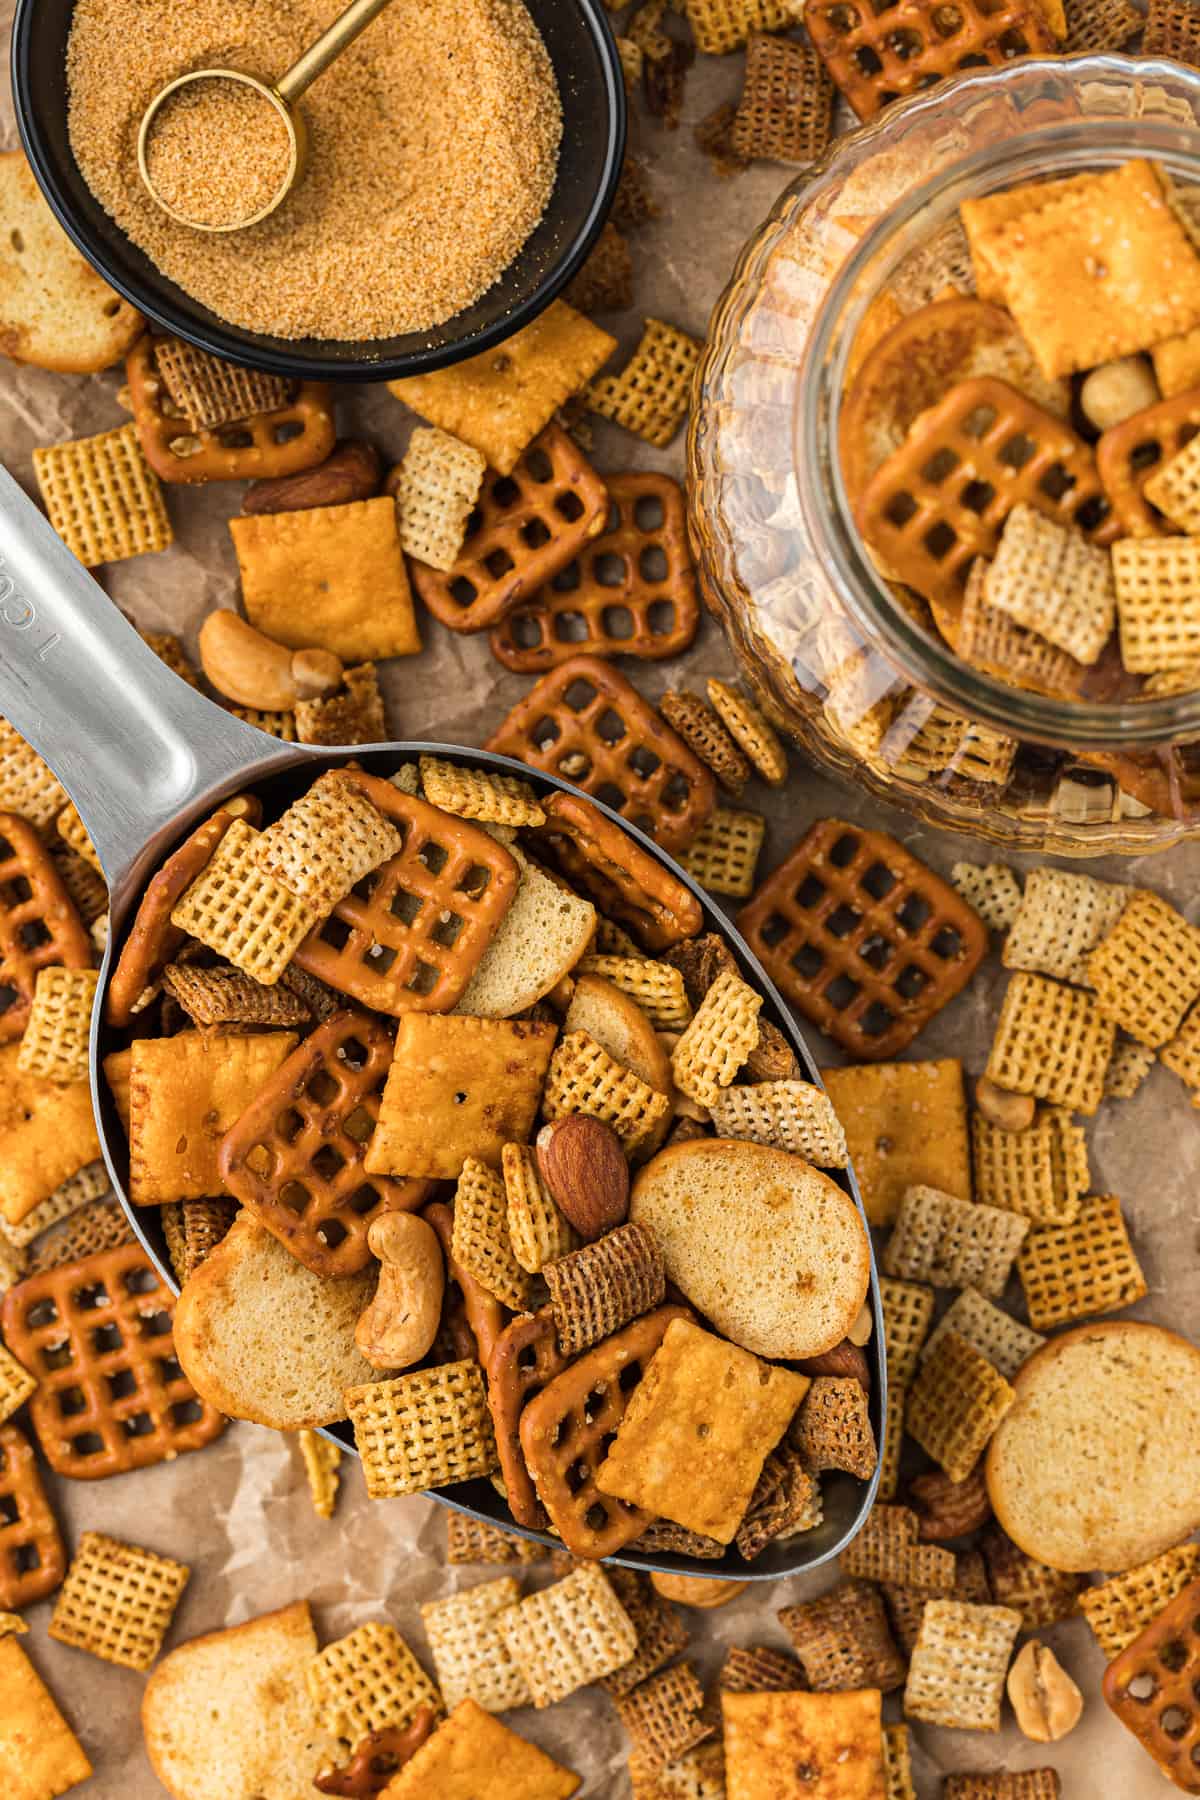 over head view of a large metal scoop full of chex mix on top of a brown paper surface covered in chex mix, a small black bowl of seasoning with a measuring spoon in it, and a clear glass jar of chex mix